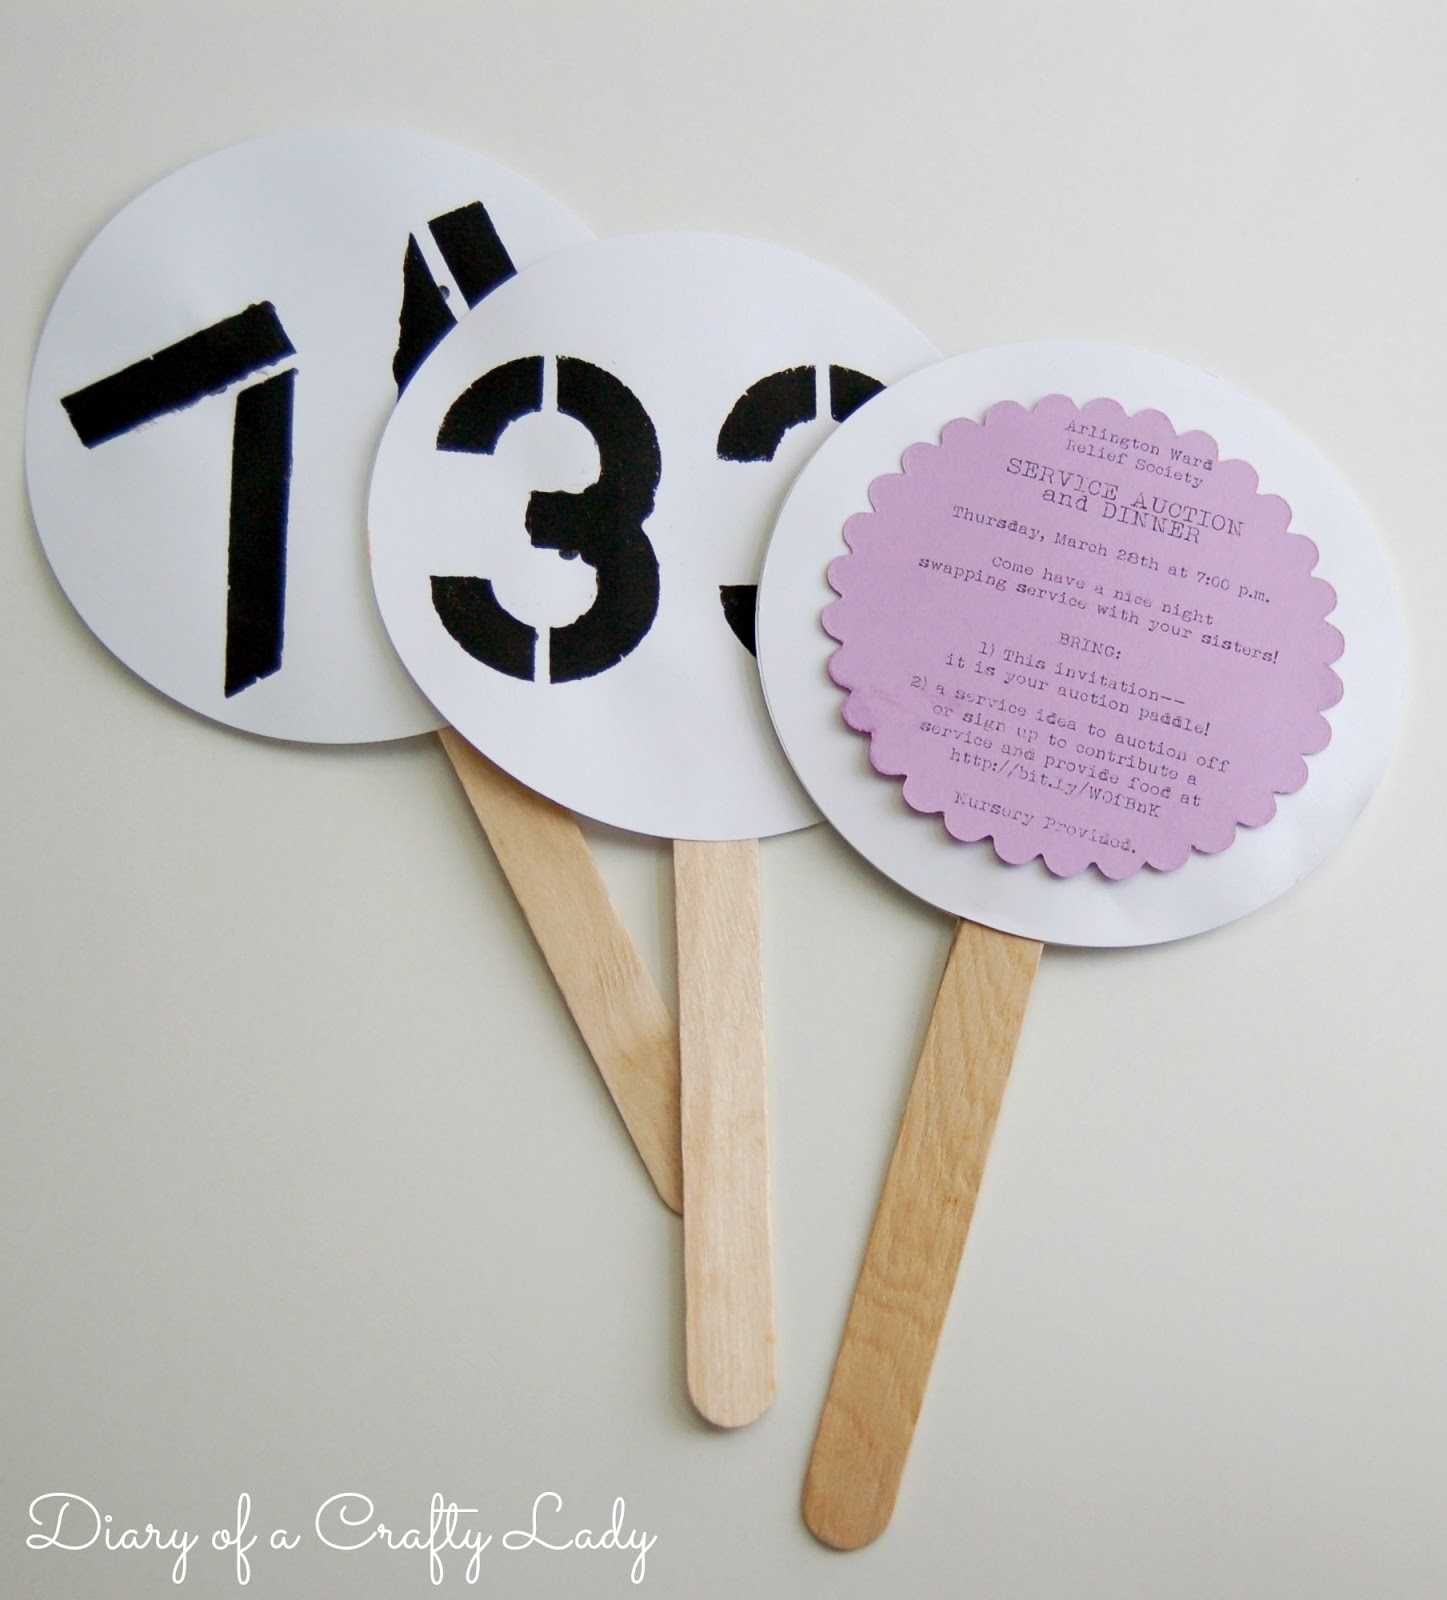 Free Bid Paddle Cliparts, Download Free Clip Art, Free Clip With Regard To Auction Bid Cards Template